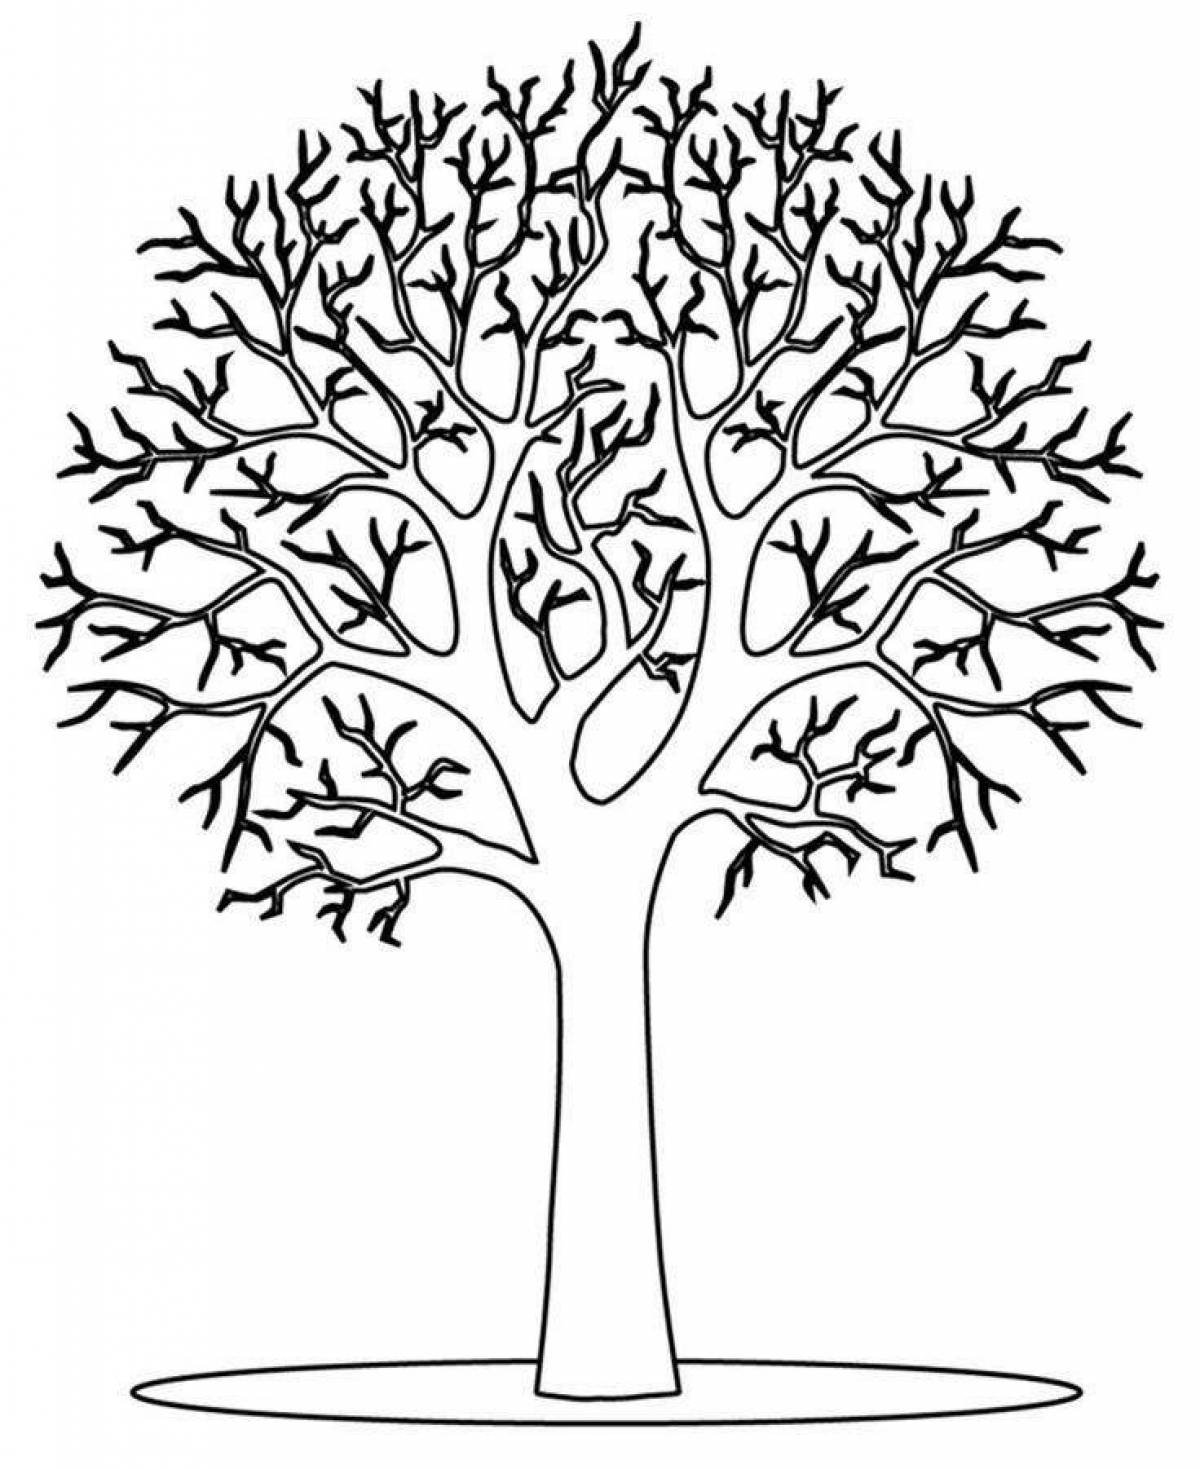 Glitter tree without leaves coloring pages for children